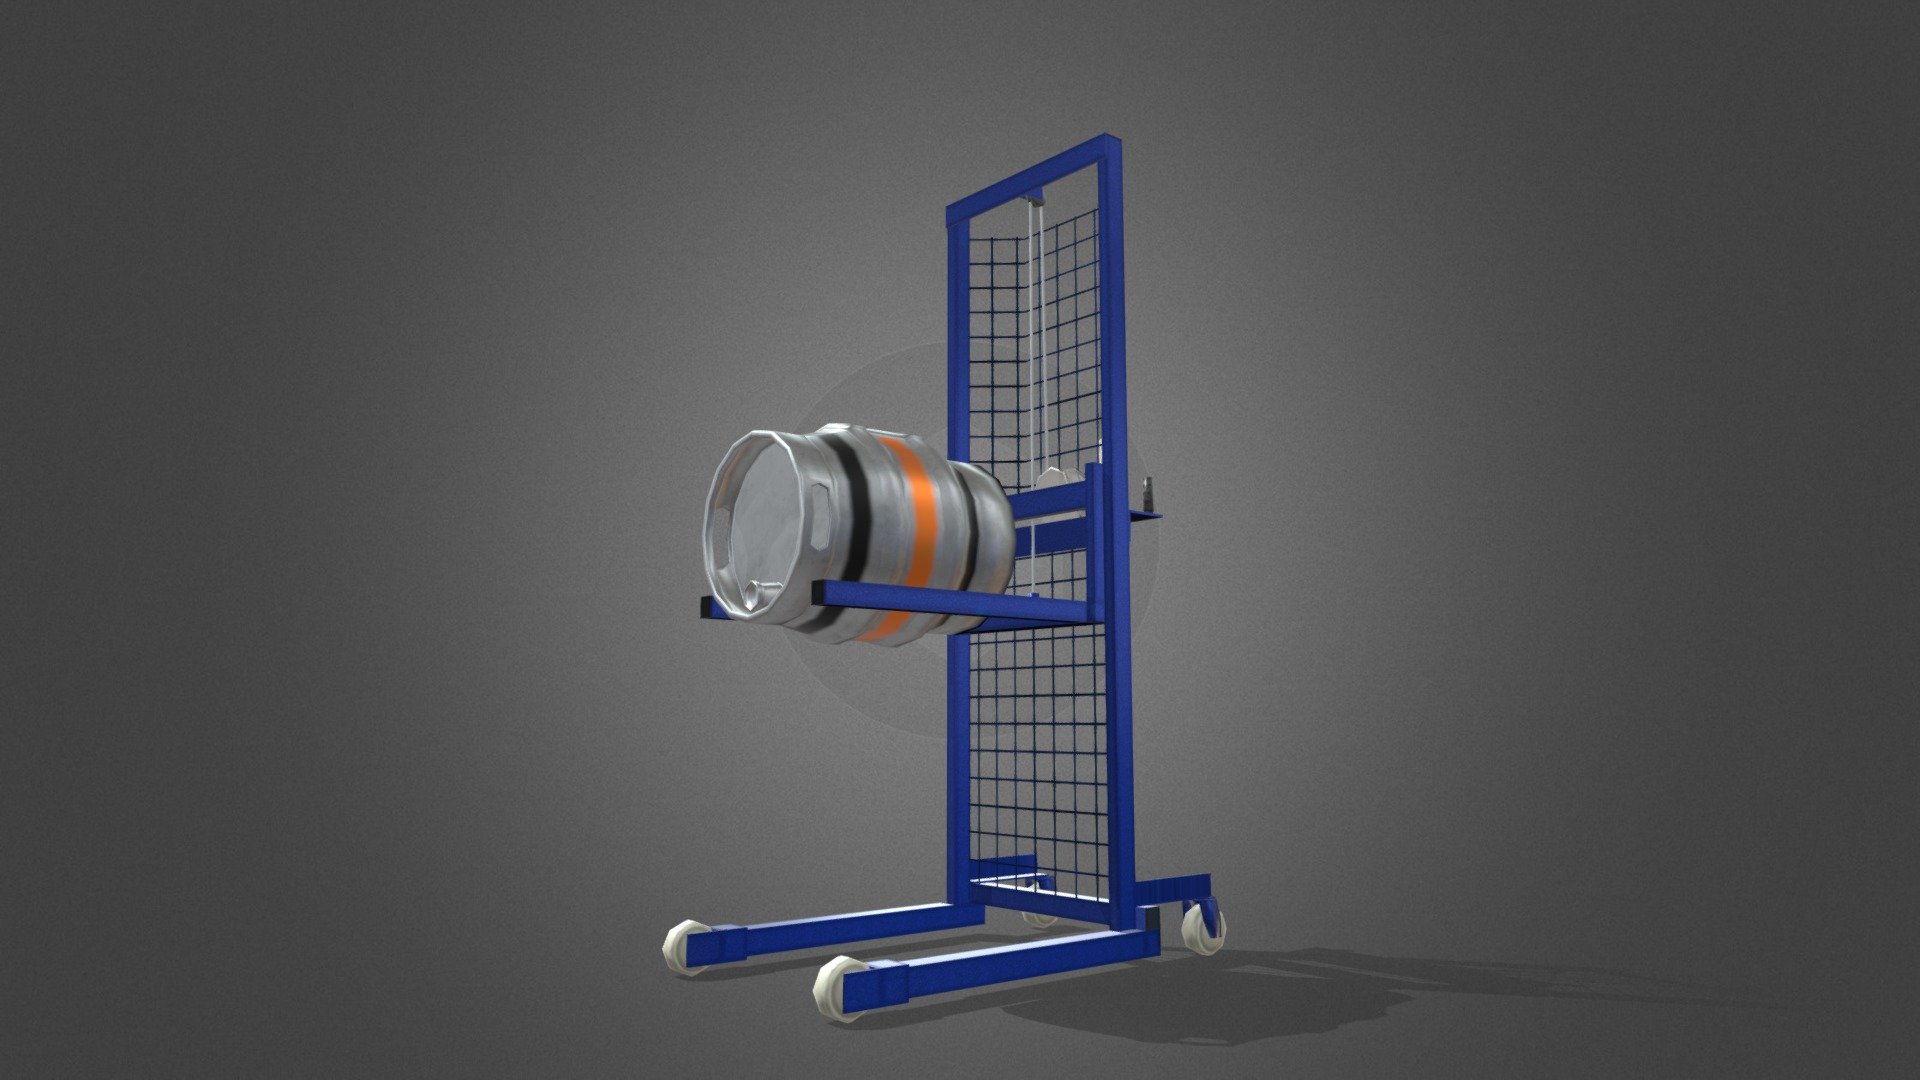 A mechanical lifter to aid in the safe and ergonomic manual handling of casks in a pub, bar, cellar or brewery environment, or similar manufacturing setting.

Part of the Pub &amp; Micro Brewery Asset Pack avaliable on Unity Asset Store.

Features:




Quad-based mesh

Low-poly model suitable for realtime rendering (game engines, AR, VR)

1024px PBR textures, set up for Unity Standard Shader (smoothness is in alpha channel of metallic)

Included files:




Original .blend file 

FBX file

Textures

Reference images where appropriate

Check out the rest of the Brewery Collection: https://skfb.ly/6RwyO - Cask Lift - Buy Royalty Free 3D model by Stainless Reality Ltd (@StainlessReality) 3d model